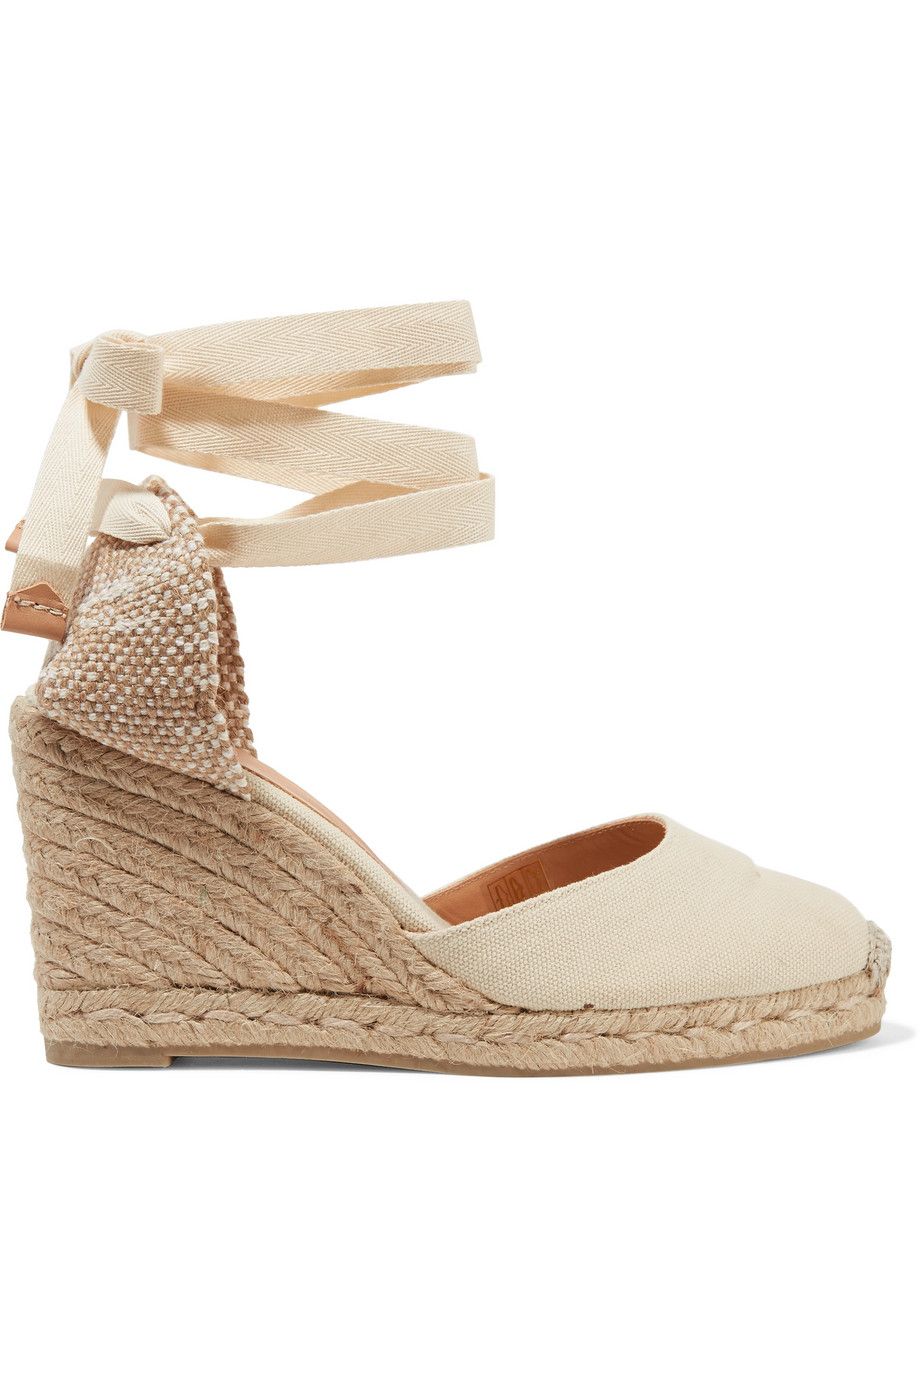 best wedge shoes